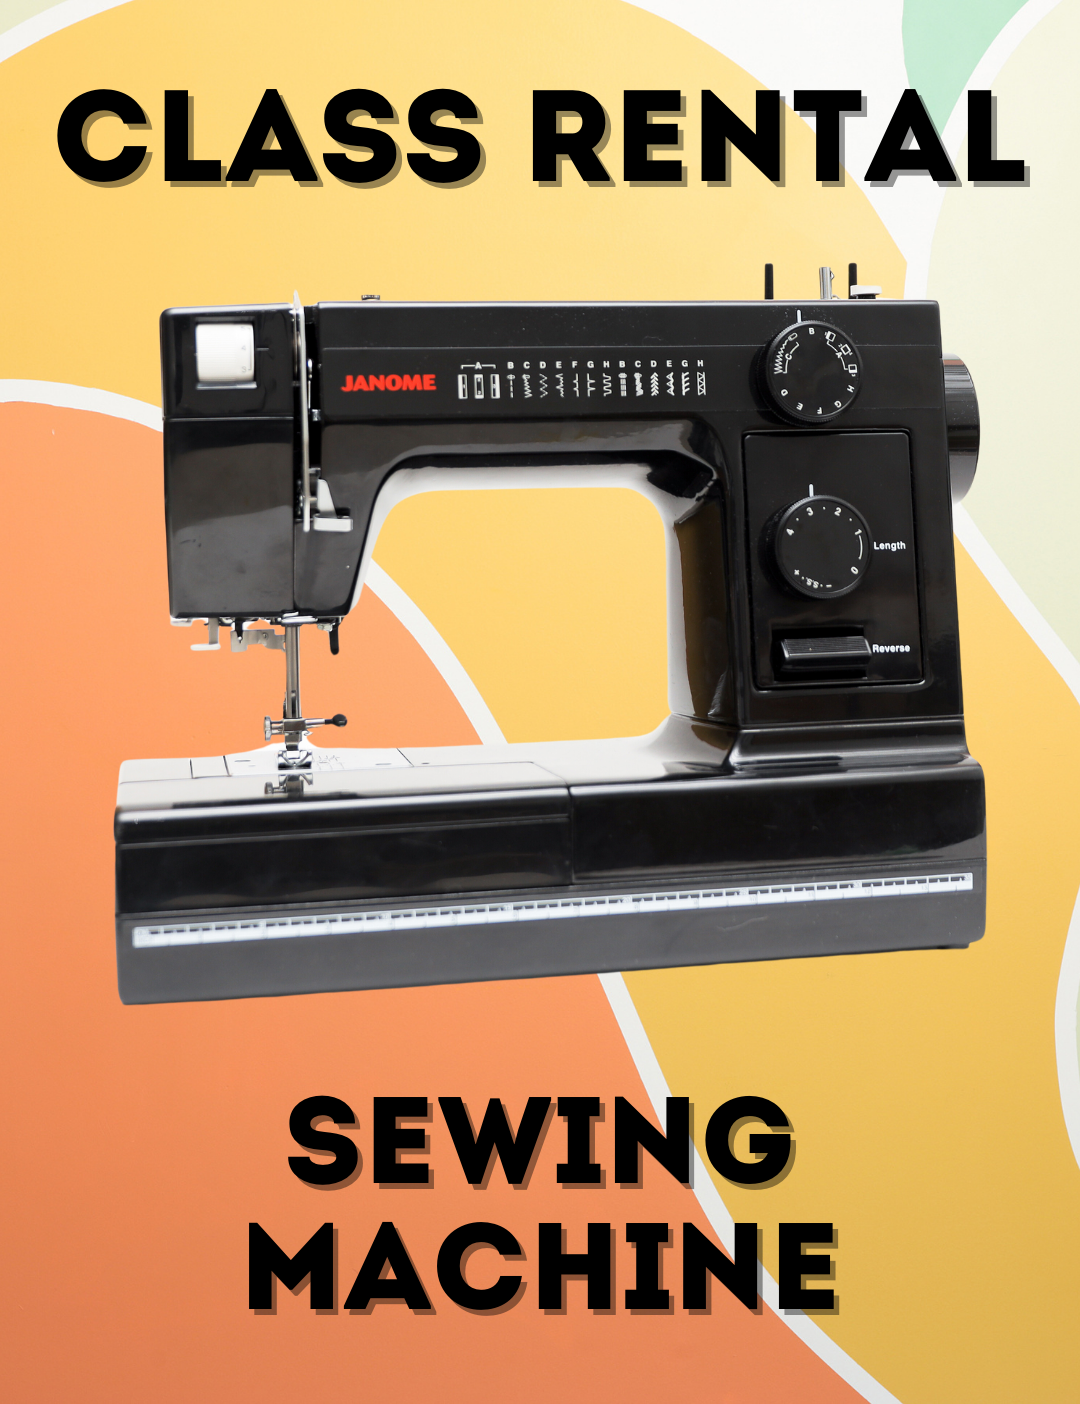 Sewing Machine Rental - For Class Use